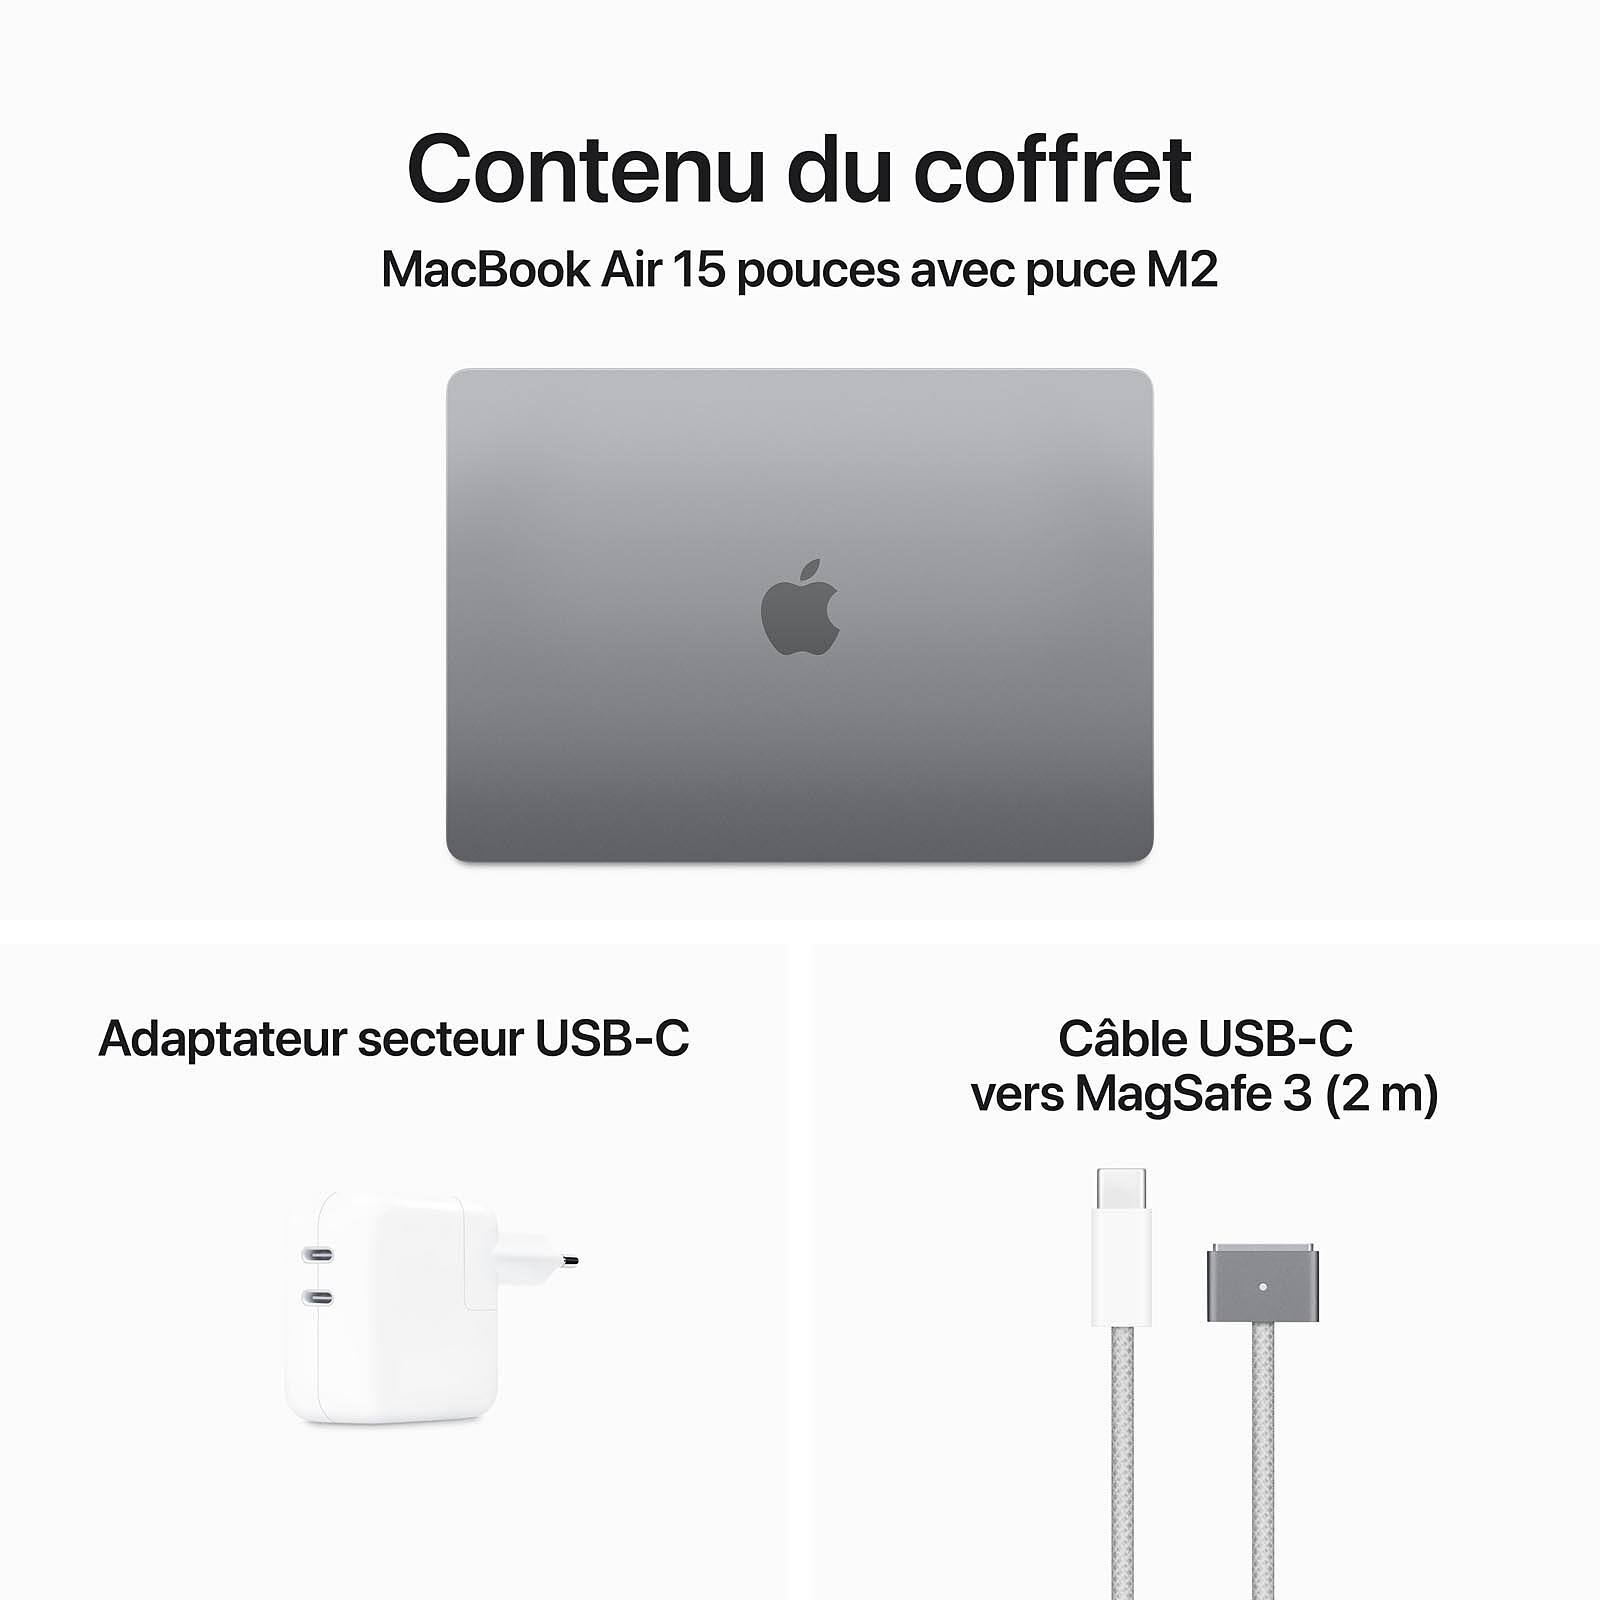 Apple MagSafe Charger - Accesorios Apple - LDLC